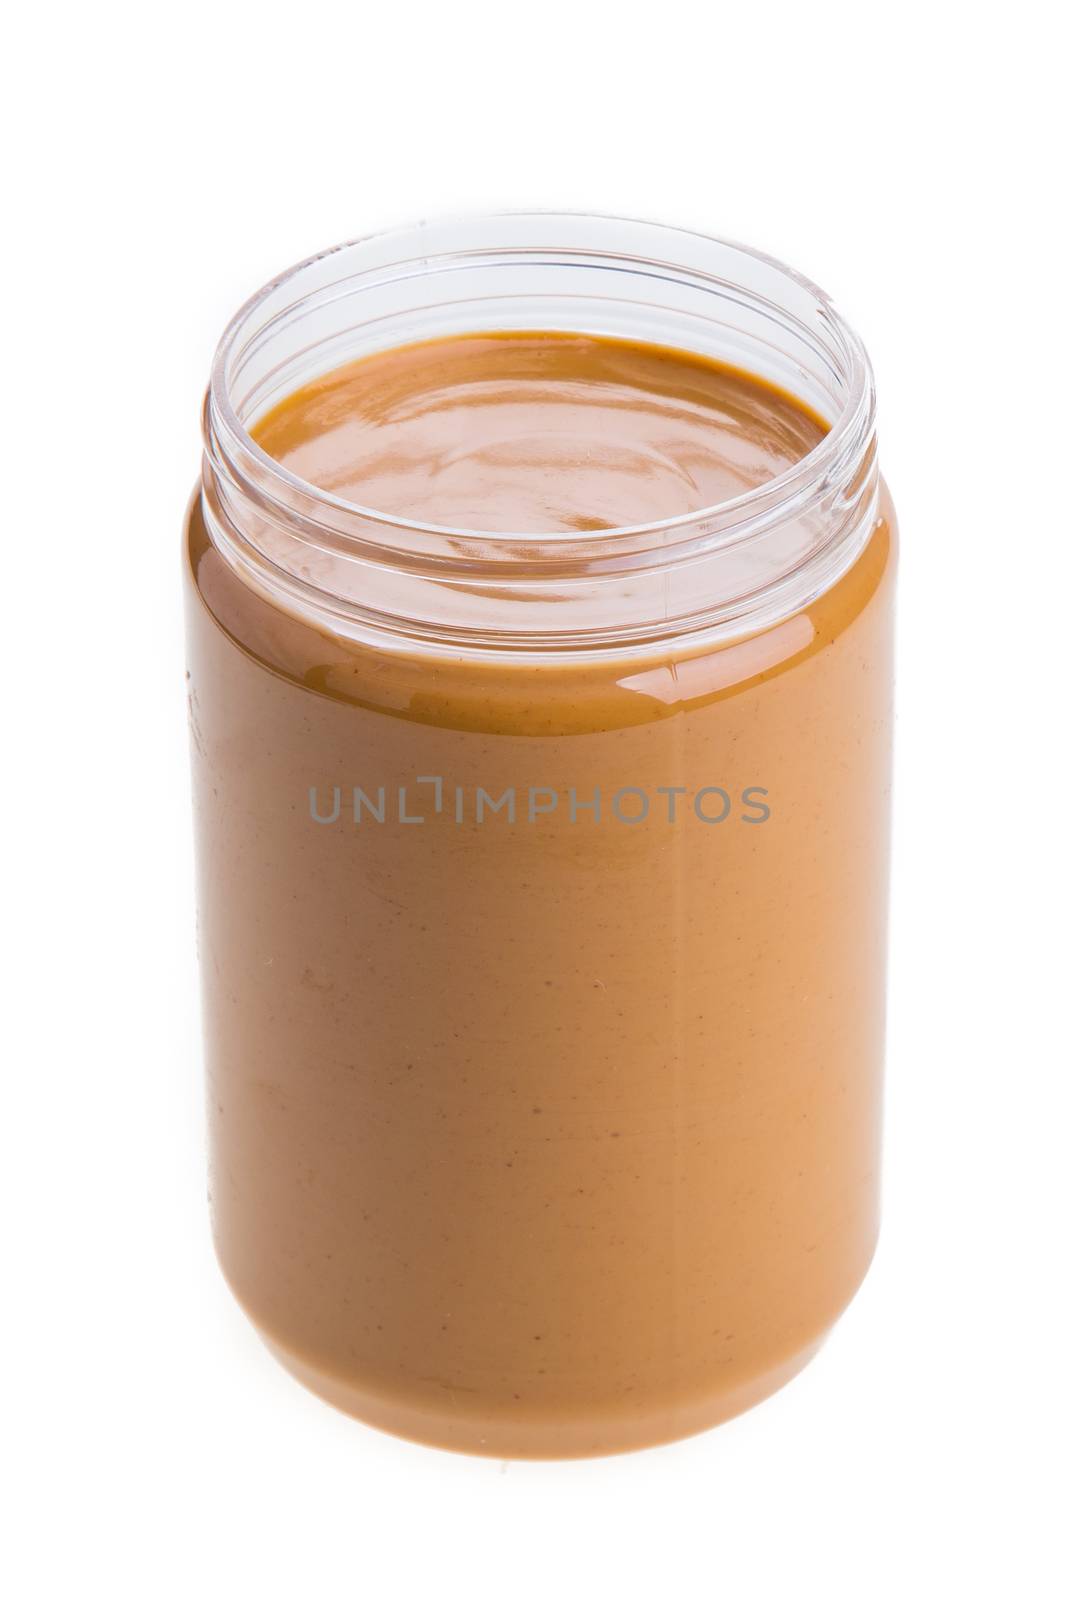 Jar of peanut butter on a white background